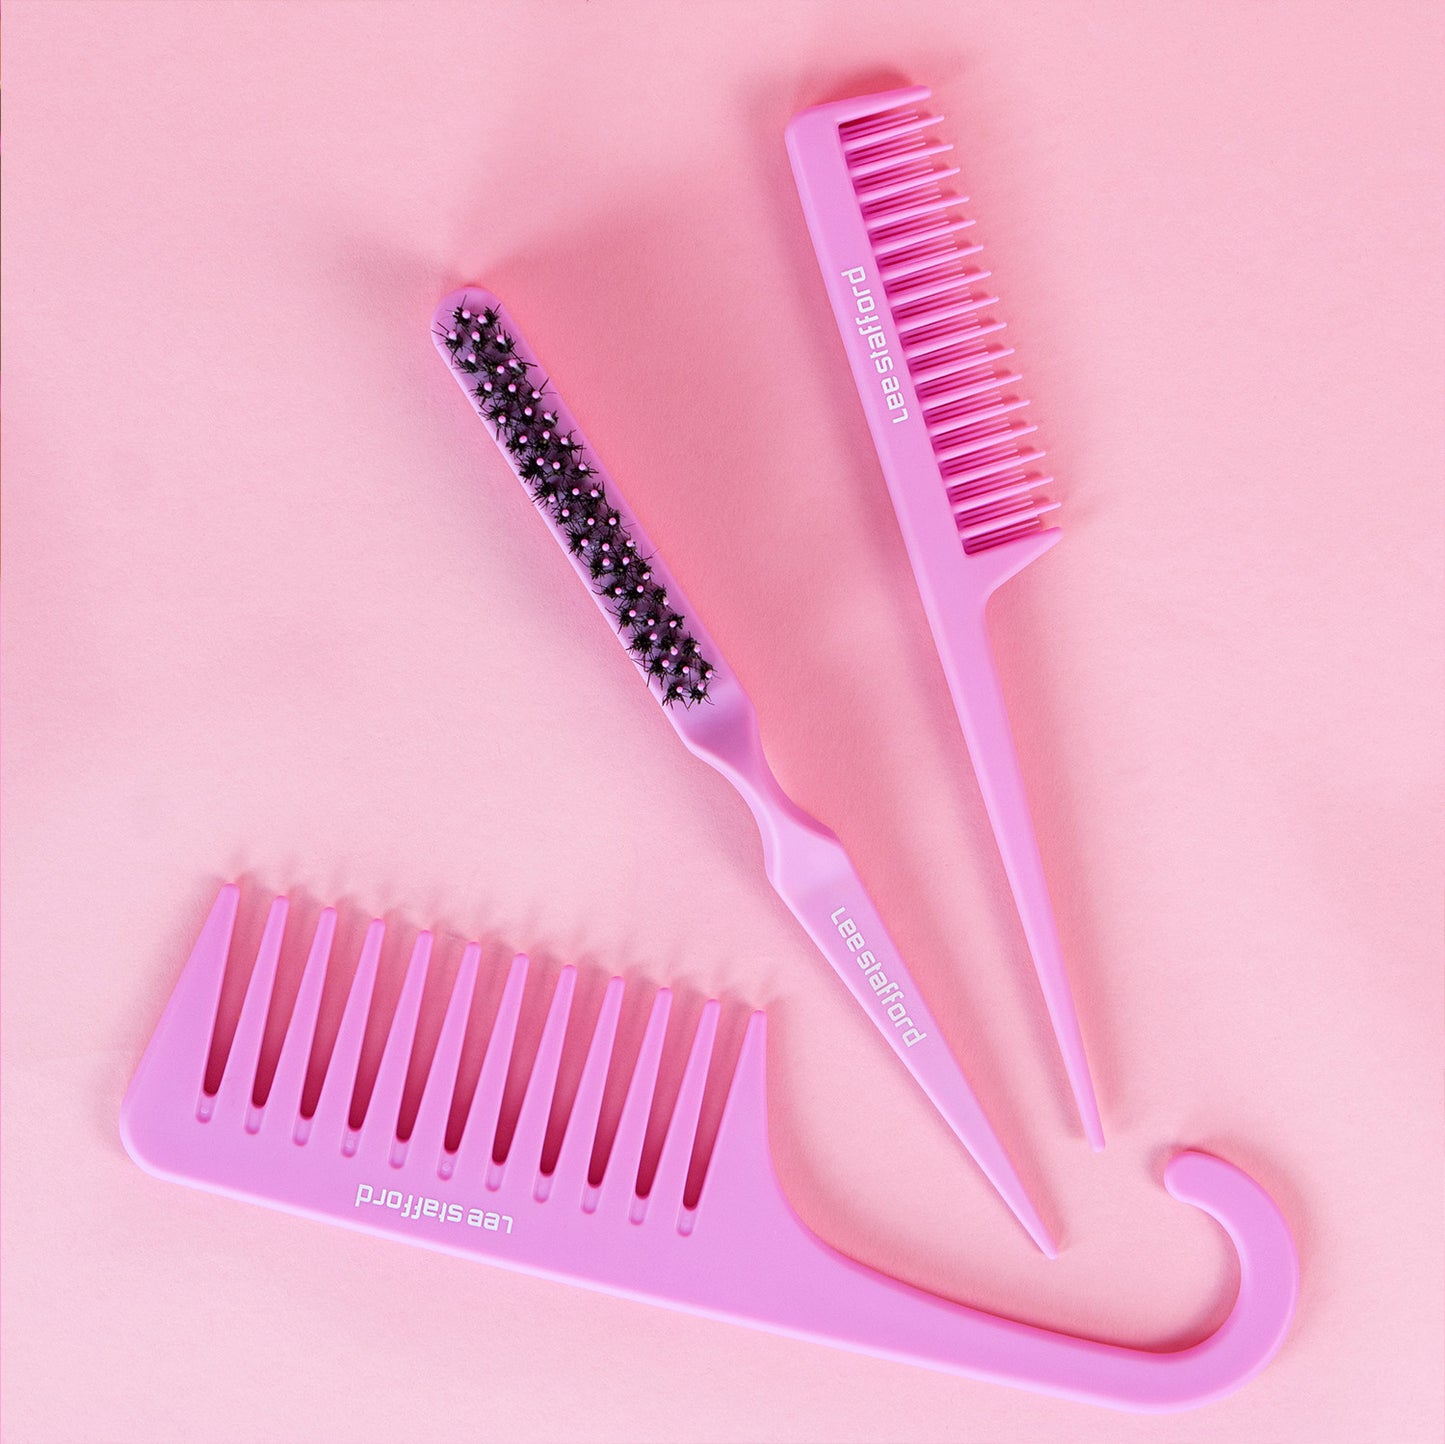 The Big In-Shower Comb